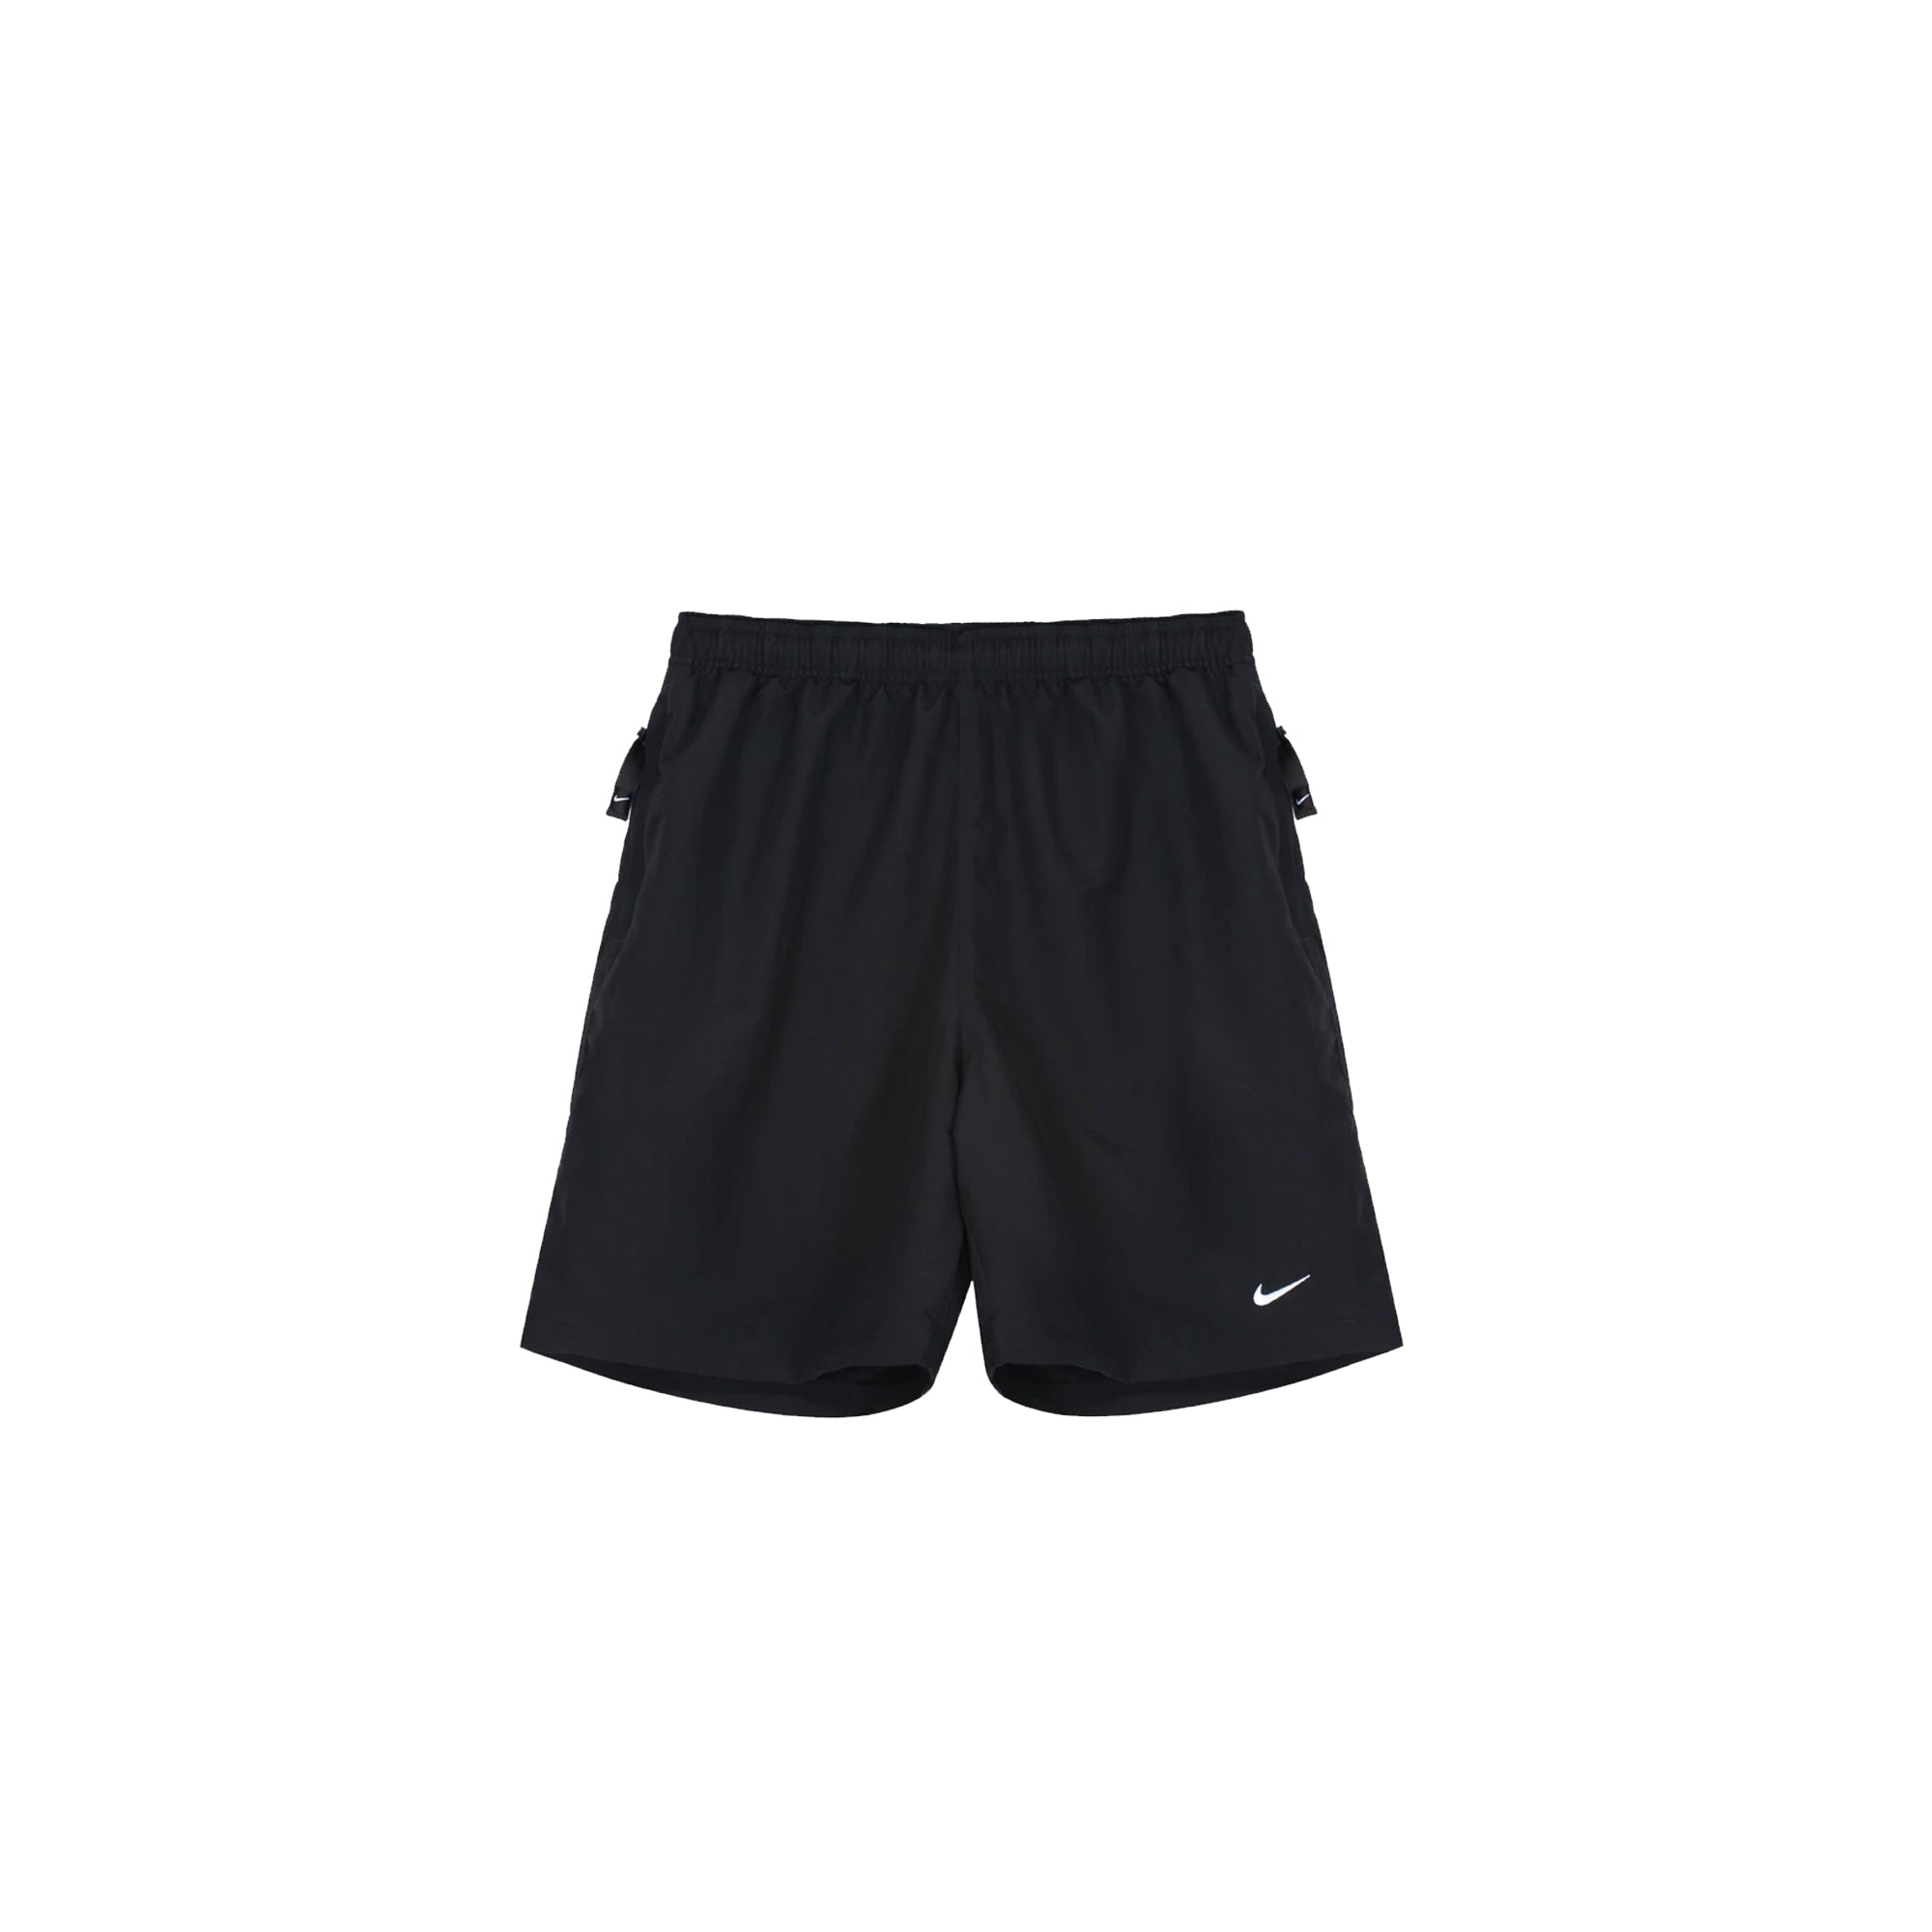 Nike Extra long boxer brief with swoosh in black